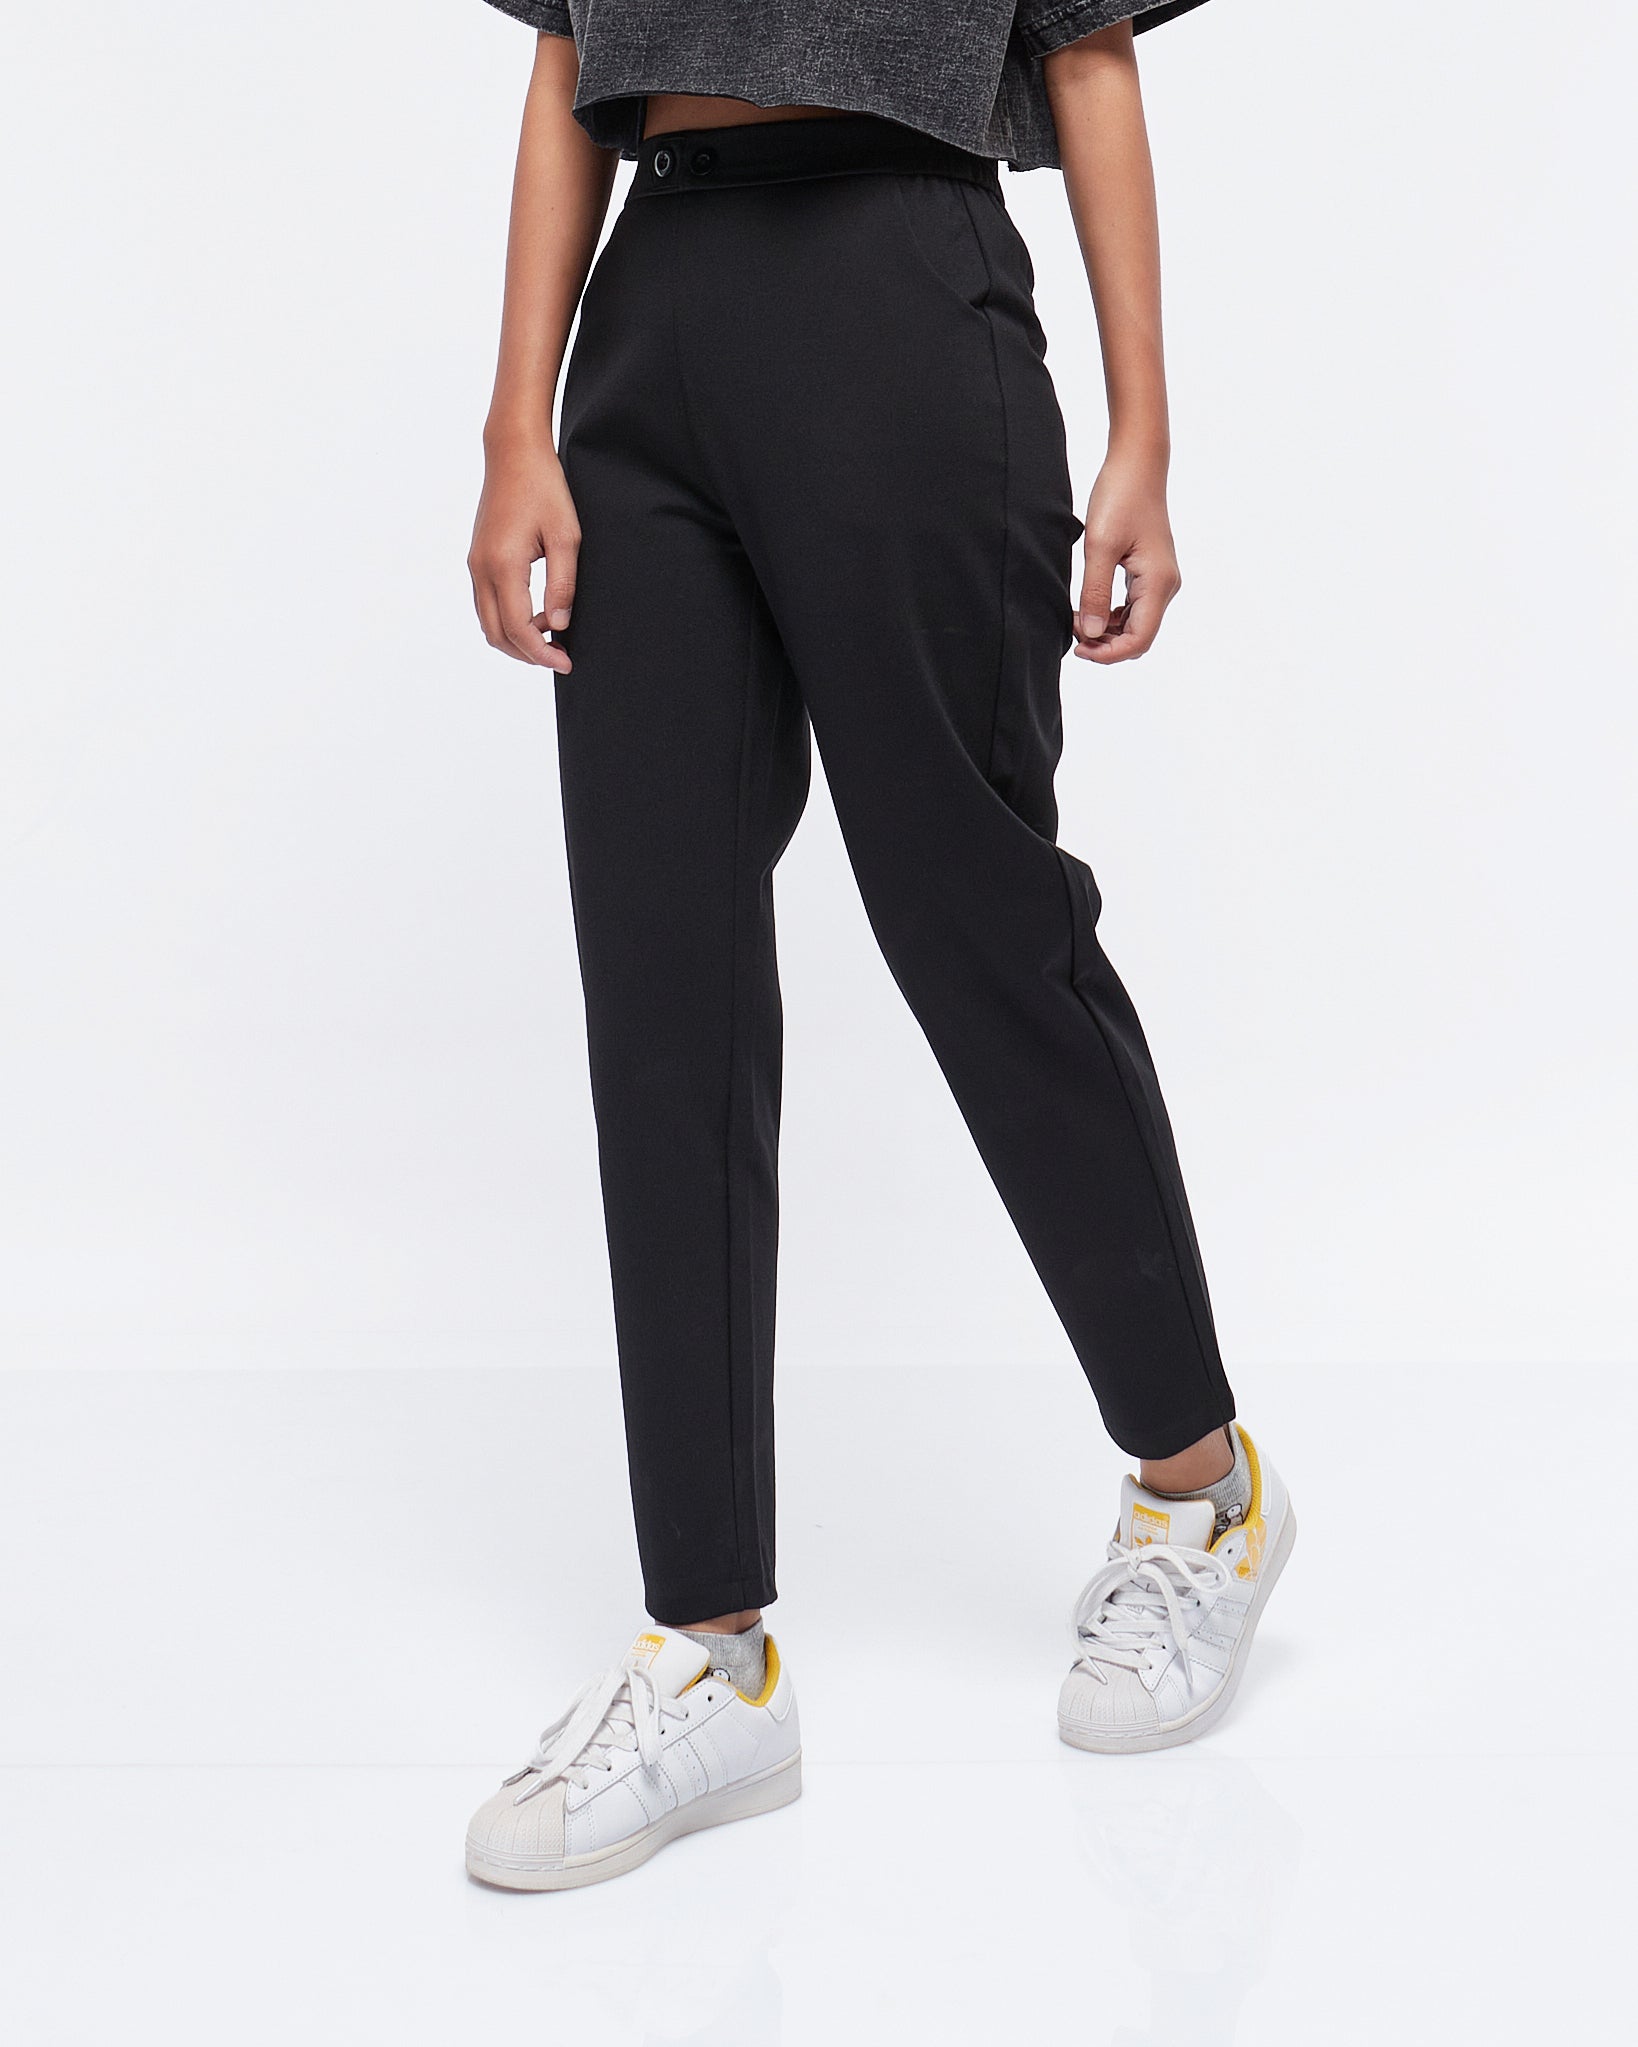 MOI OUTFIT-High Waist Lady Front Button Pants 20.90